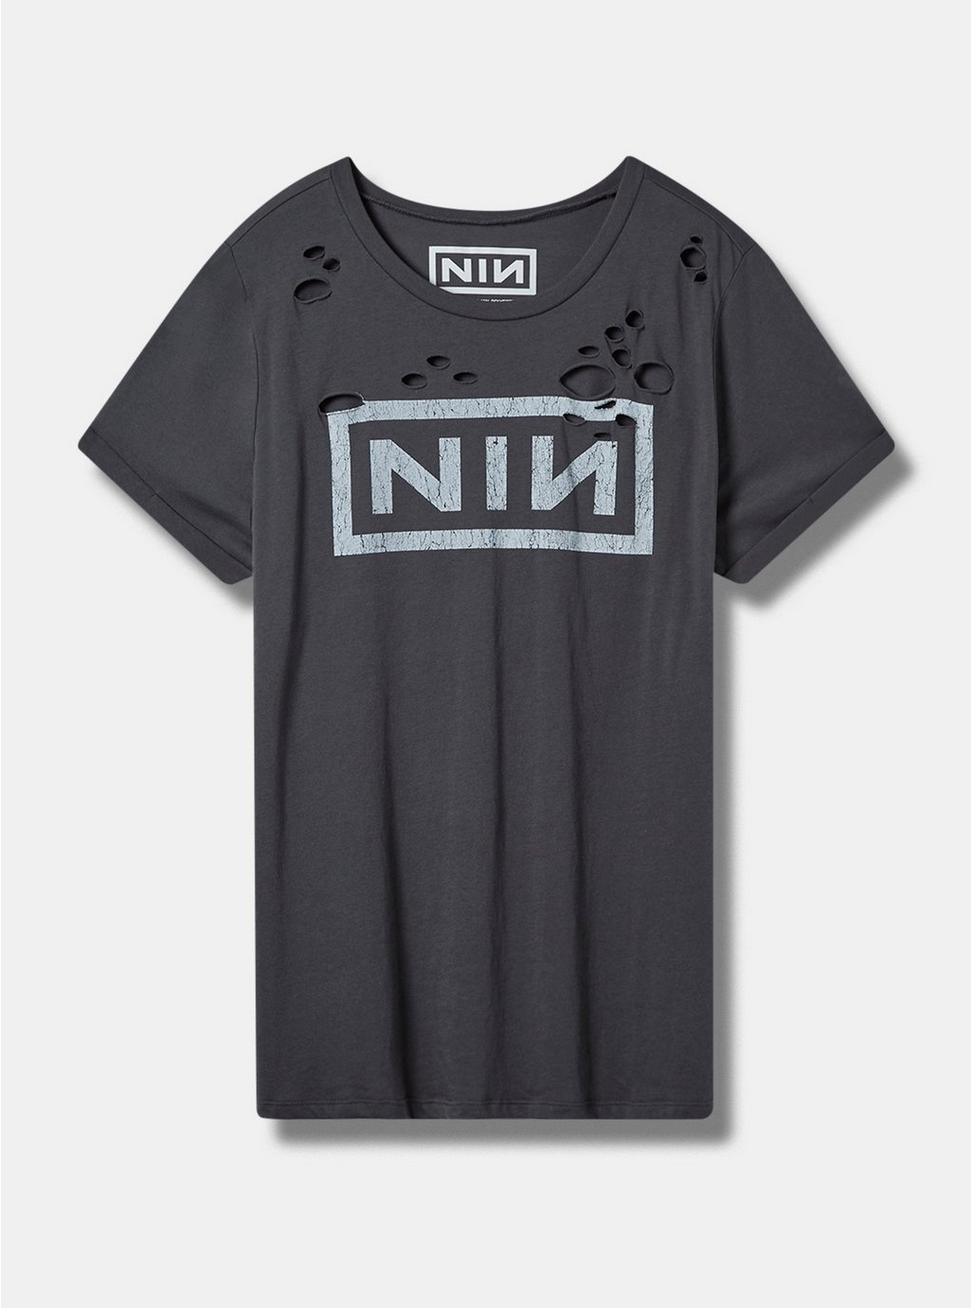 Nine Inch Nails Relaxed Fit Cotton Distressed Tunic Tee, VINTAGE BLACK, hi-res